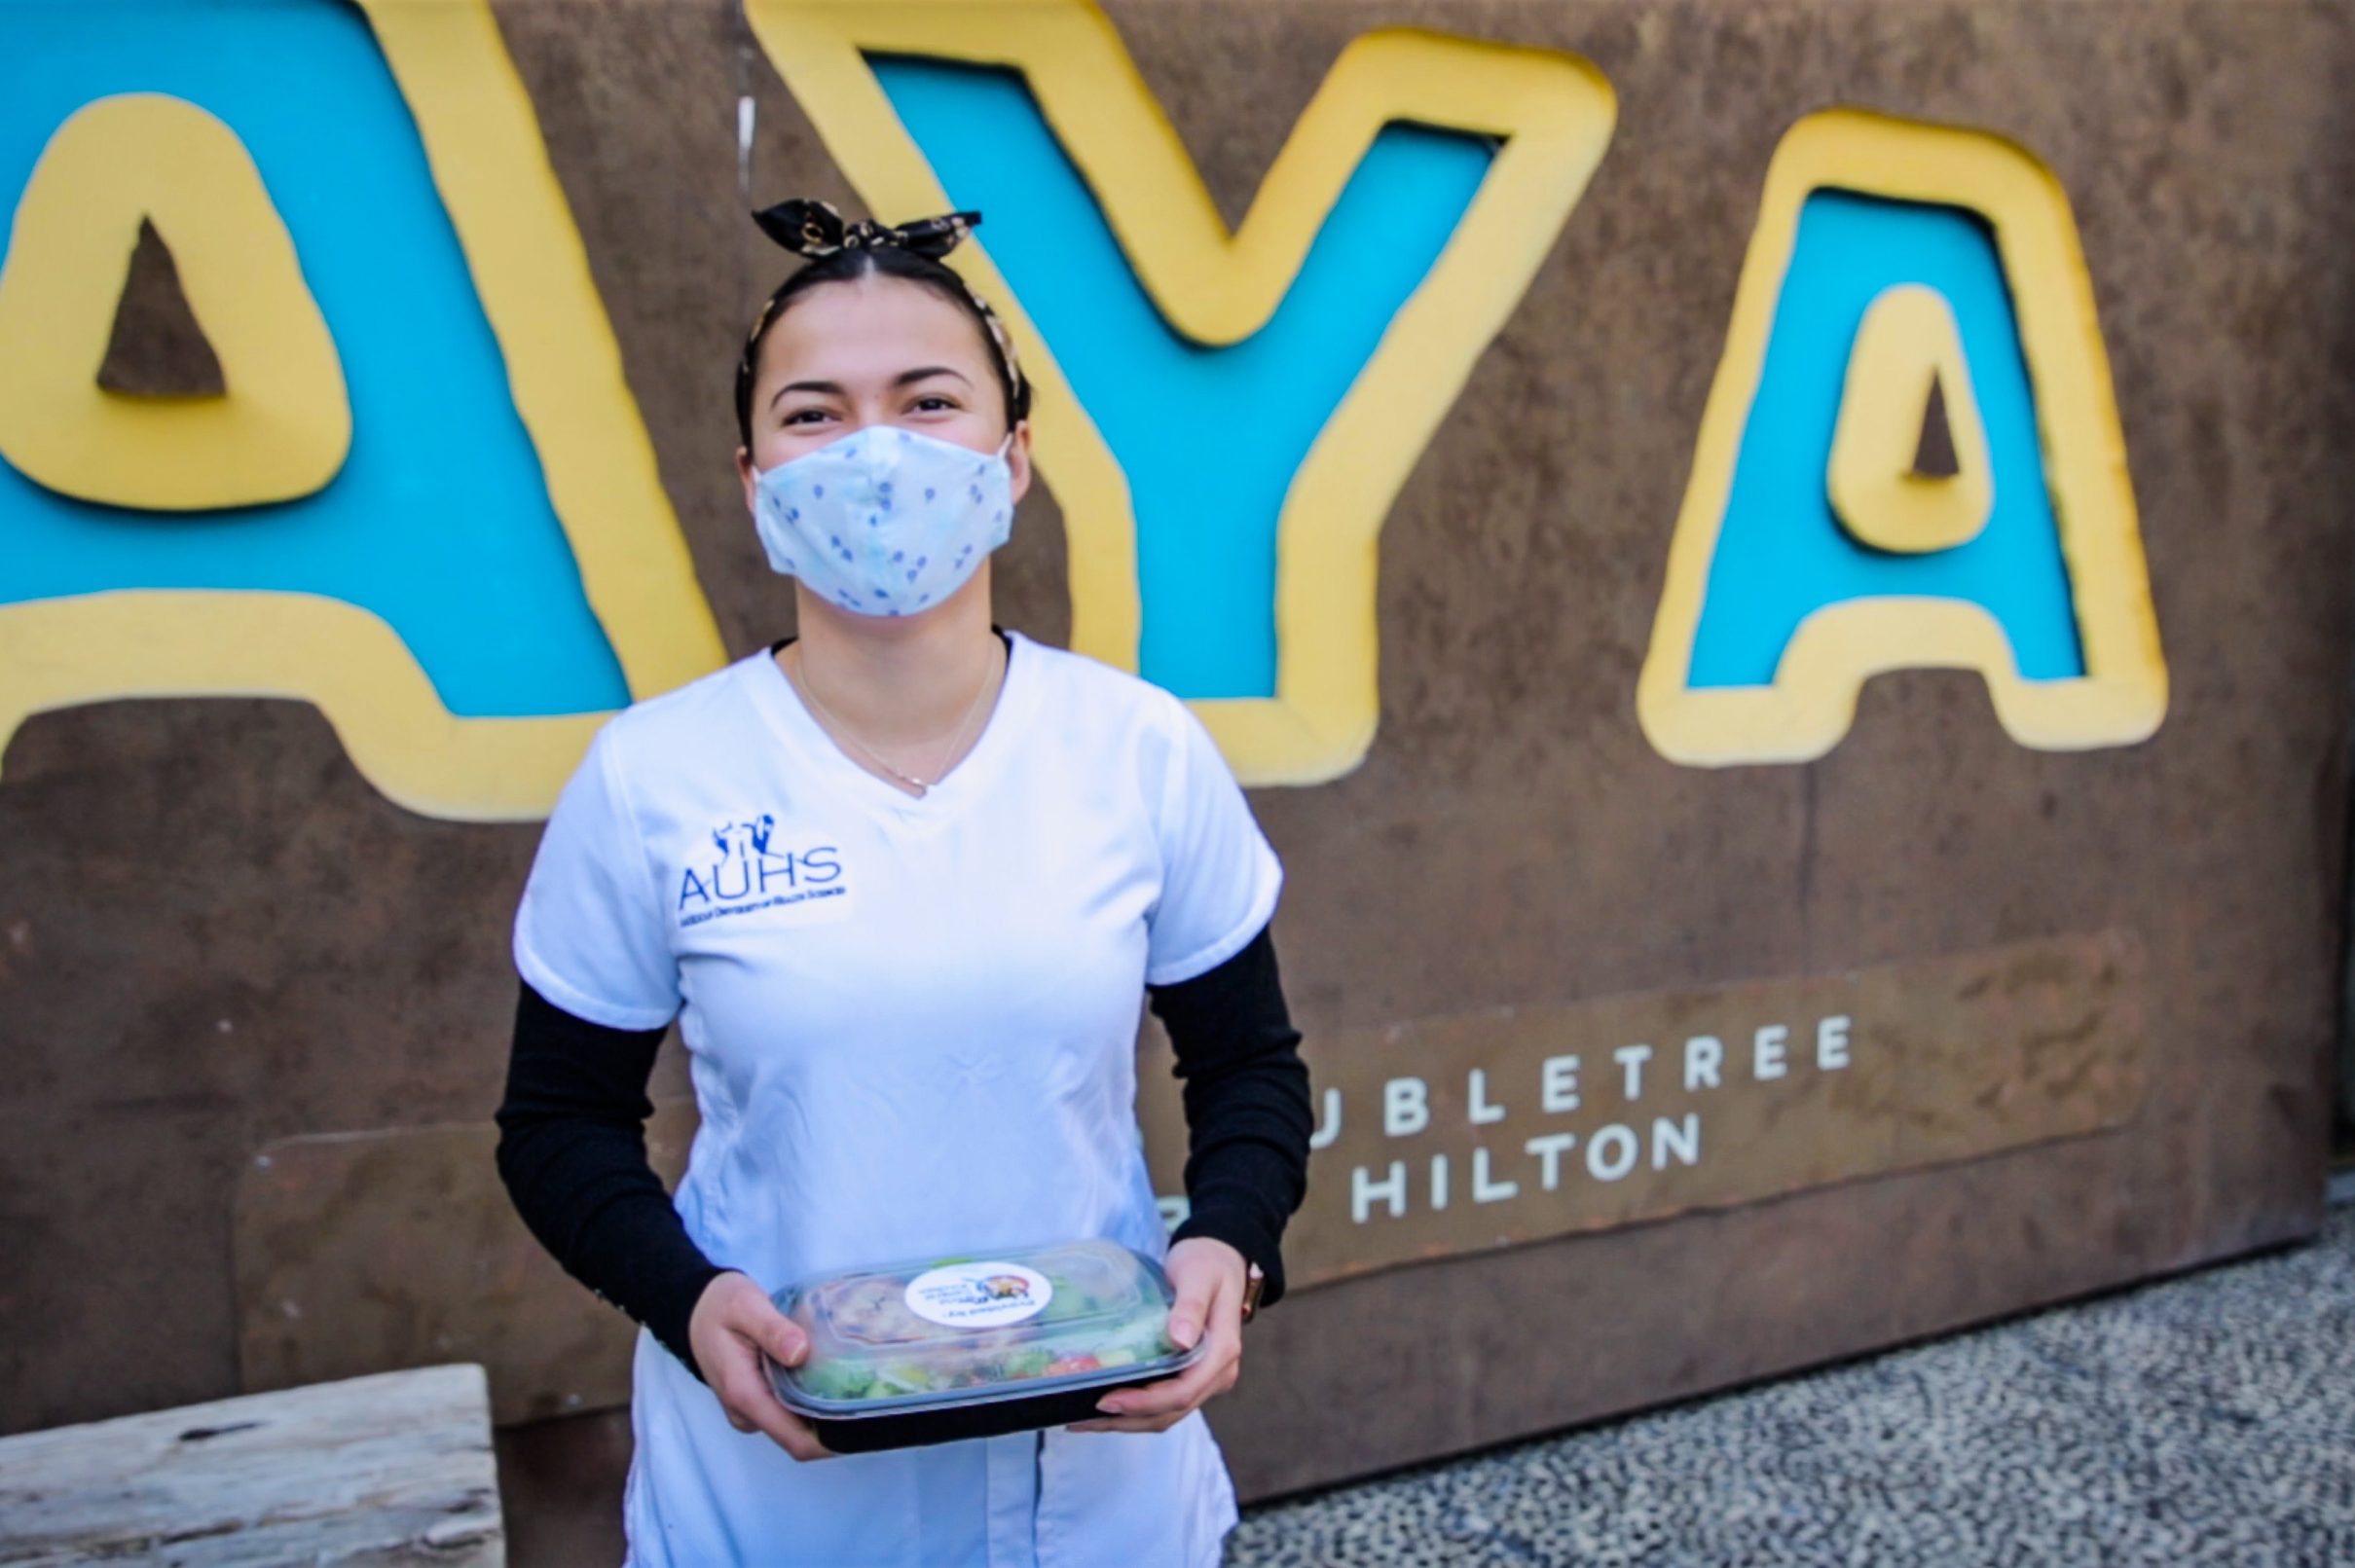 A woman wearing a face mask holds a boxed lunch in front of a wall.